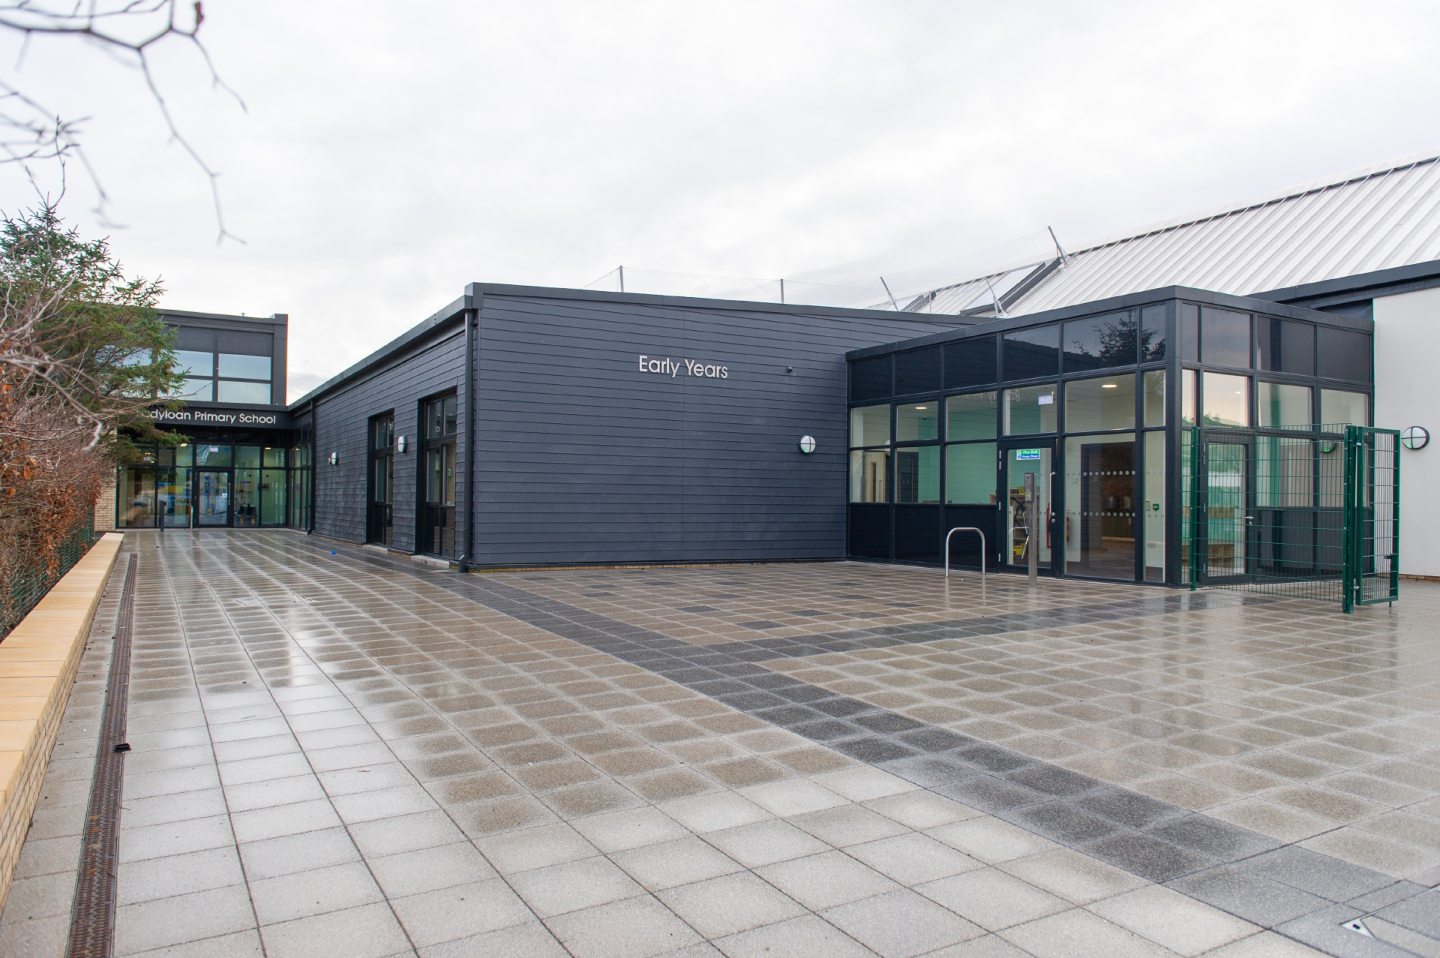 The new Ladyloan Primary School.